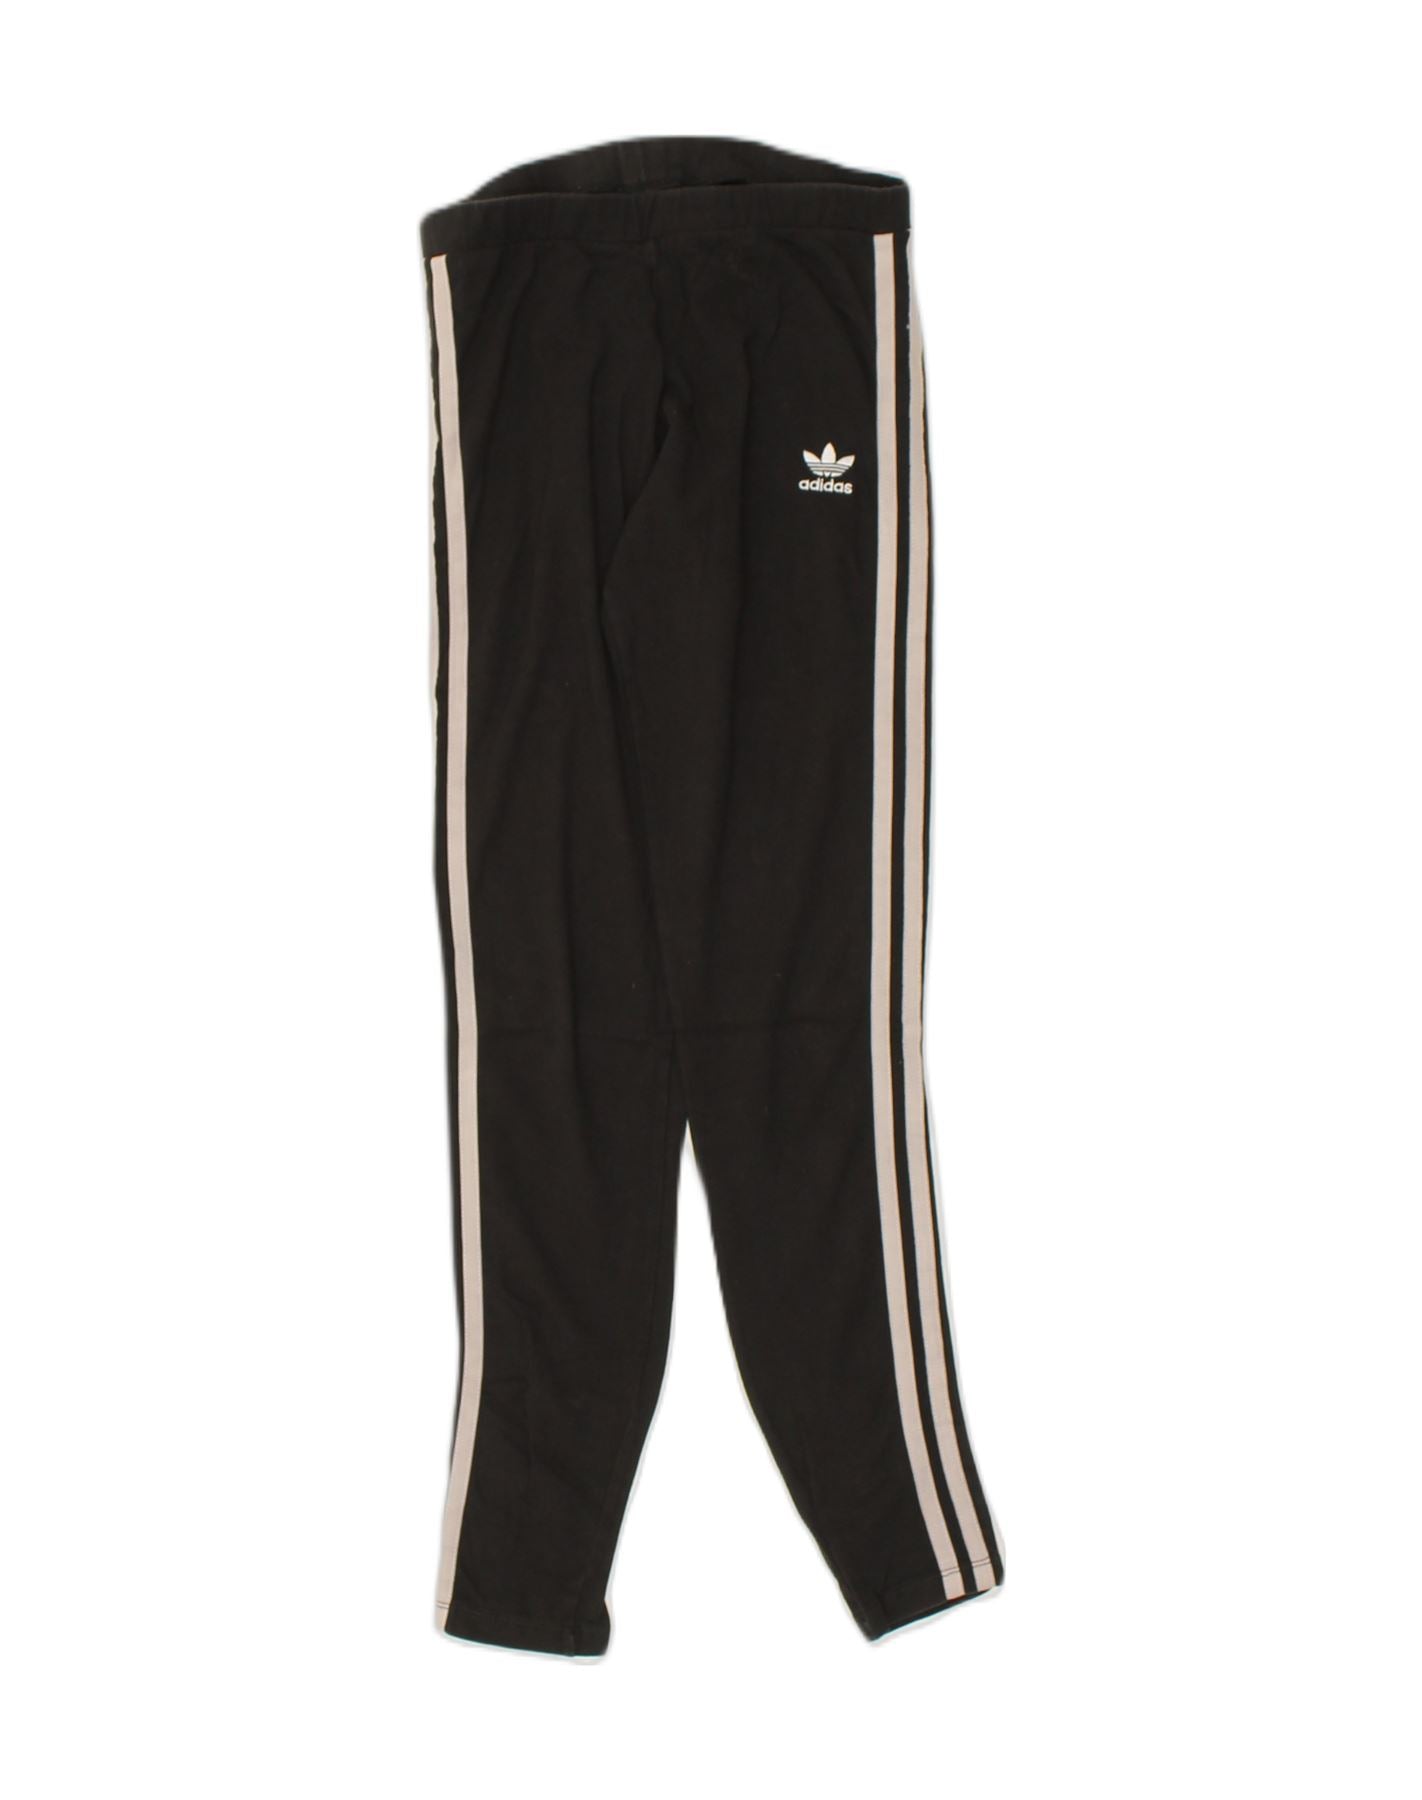 ADIDAS Womens Leggings UK 10 Small Black Polyester, Vintage & Second-Hand  Clothing Online